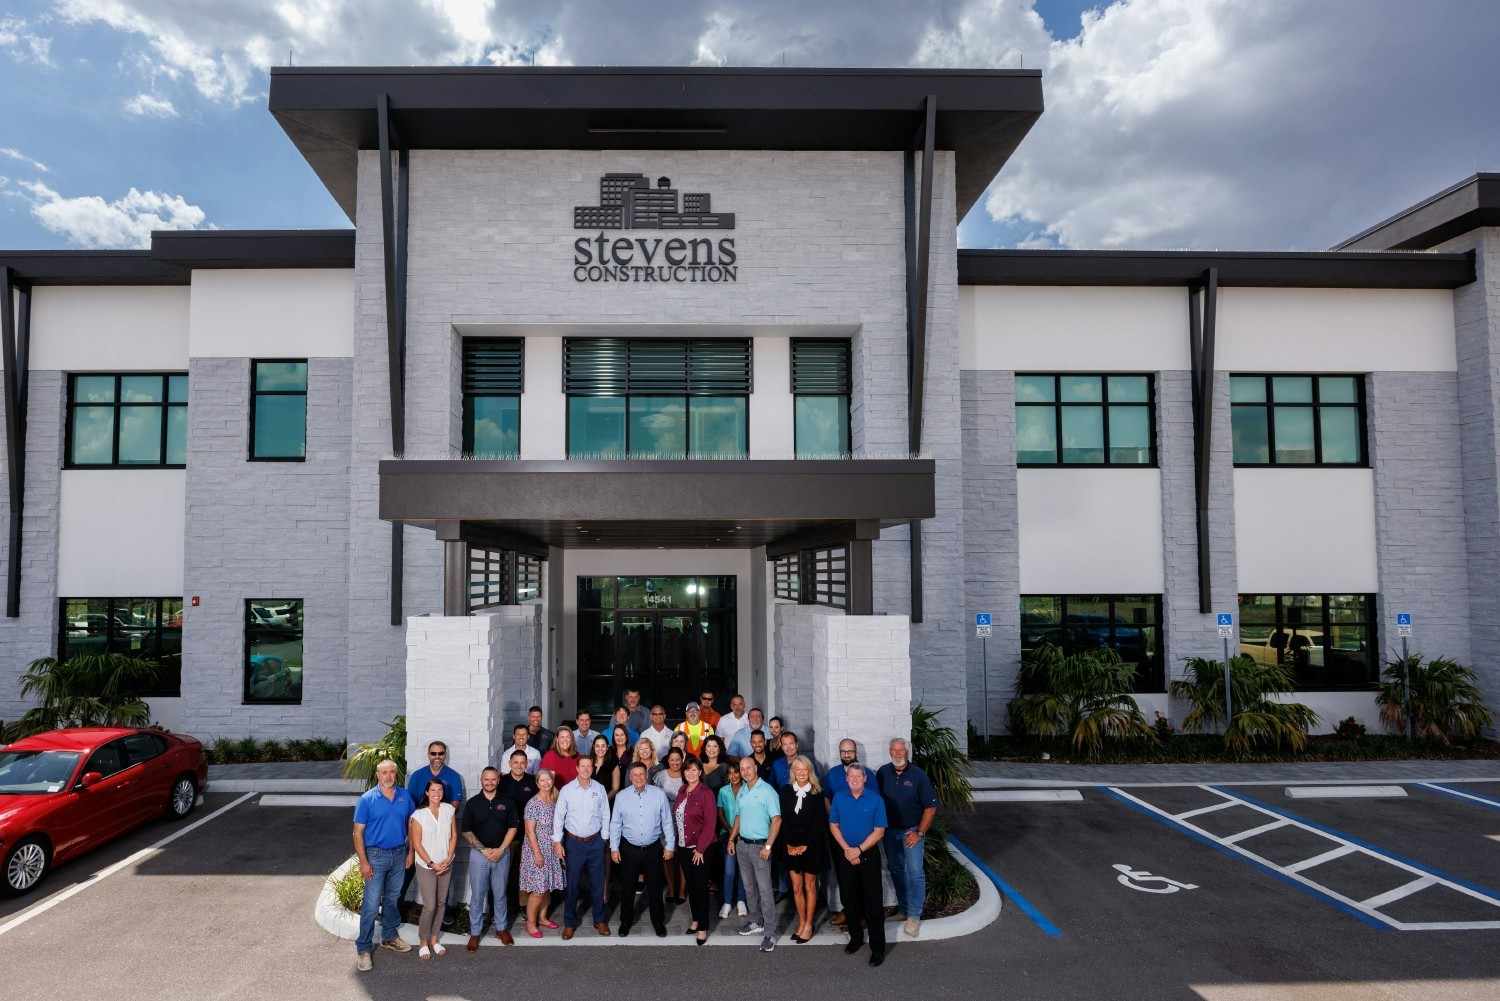 Stevens Construction was ranked 4th as the Best Place to Work in Southwest Florida and 1st of the construction companies